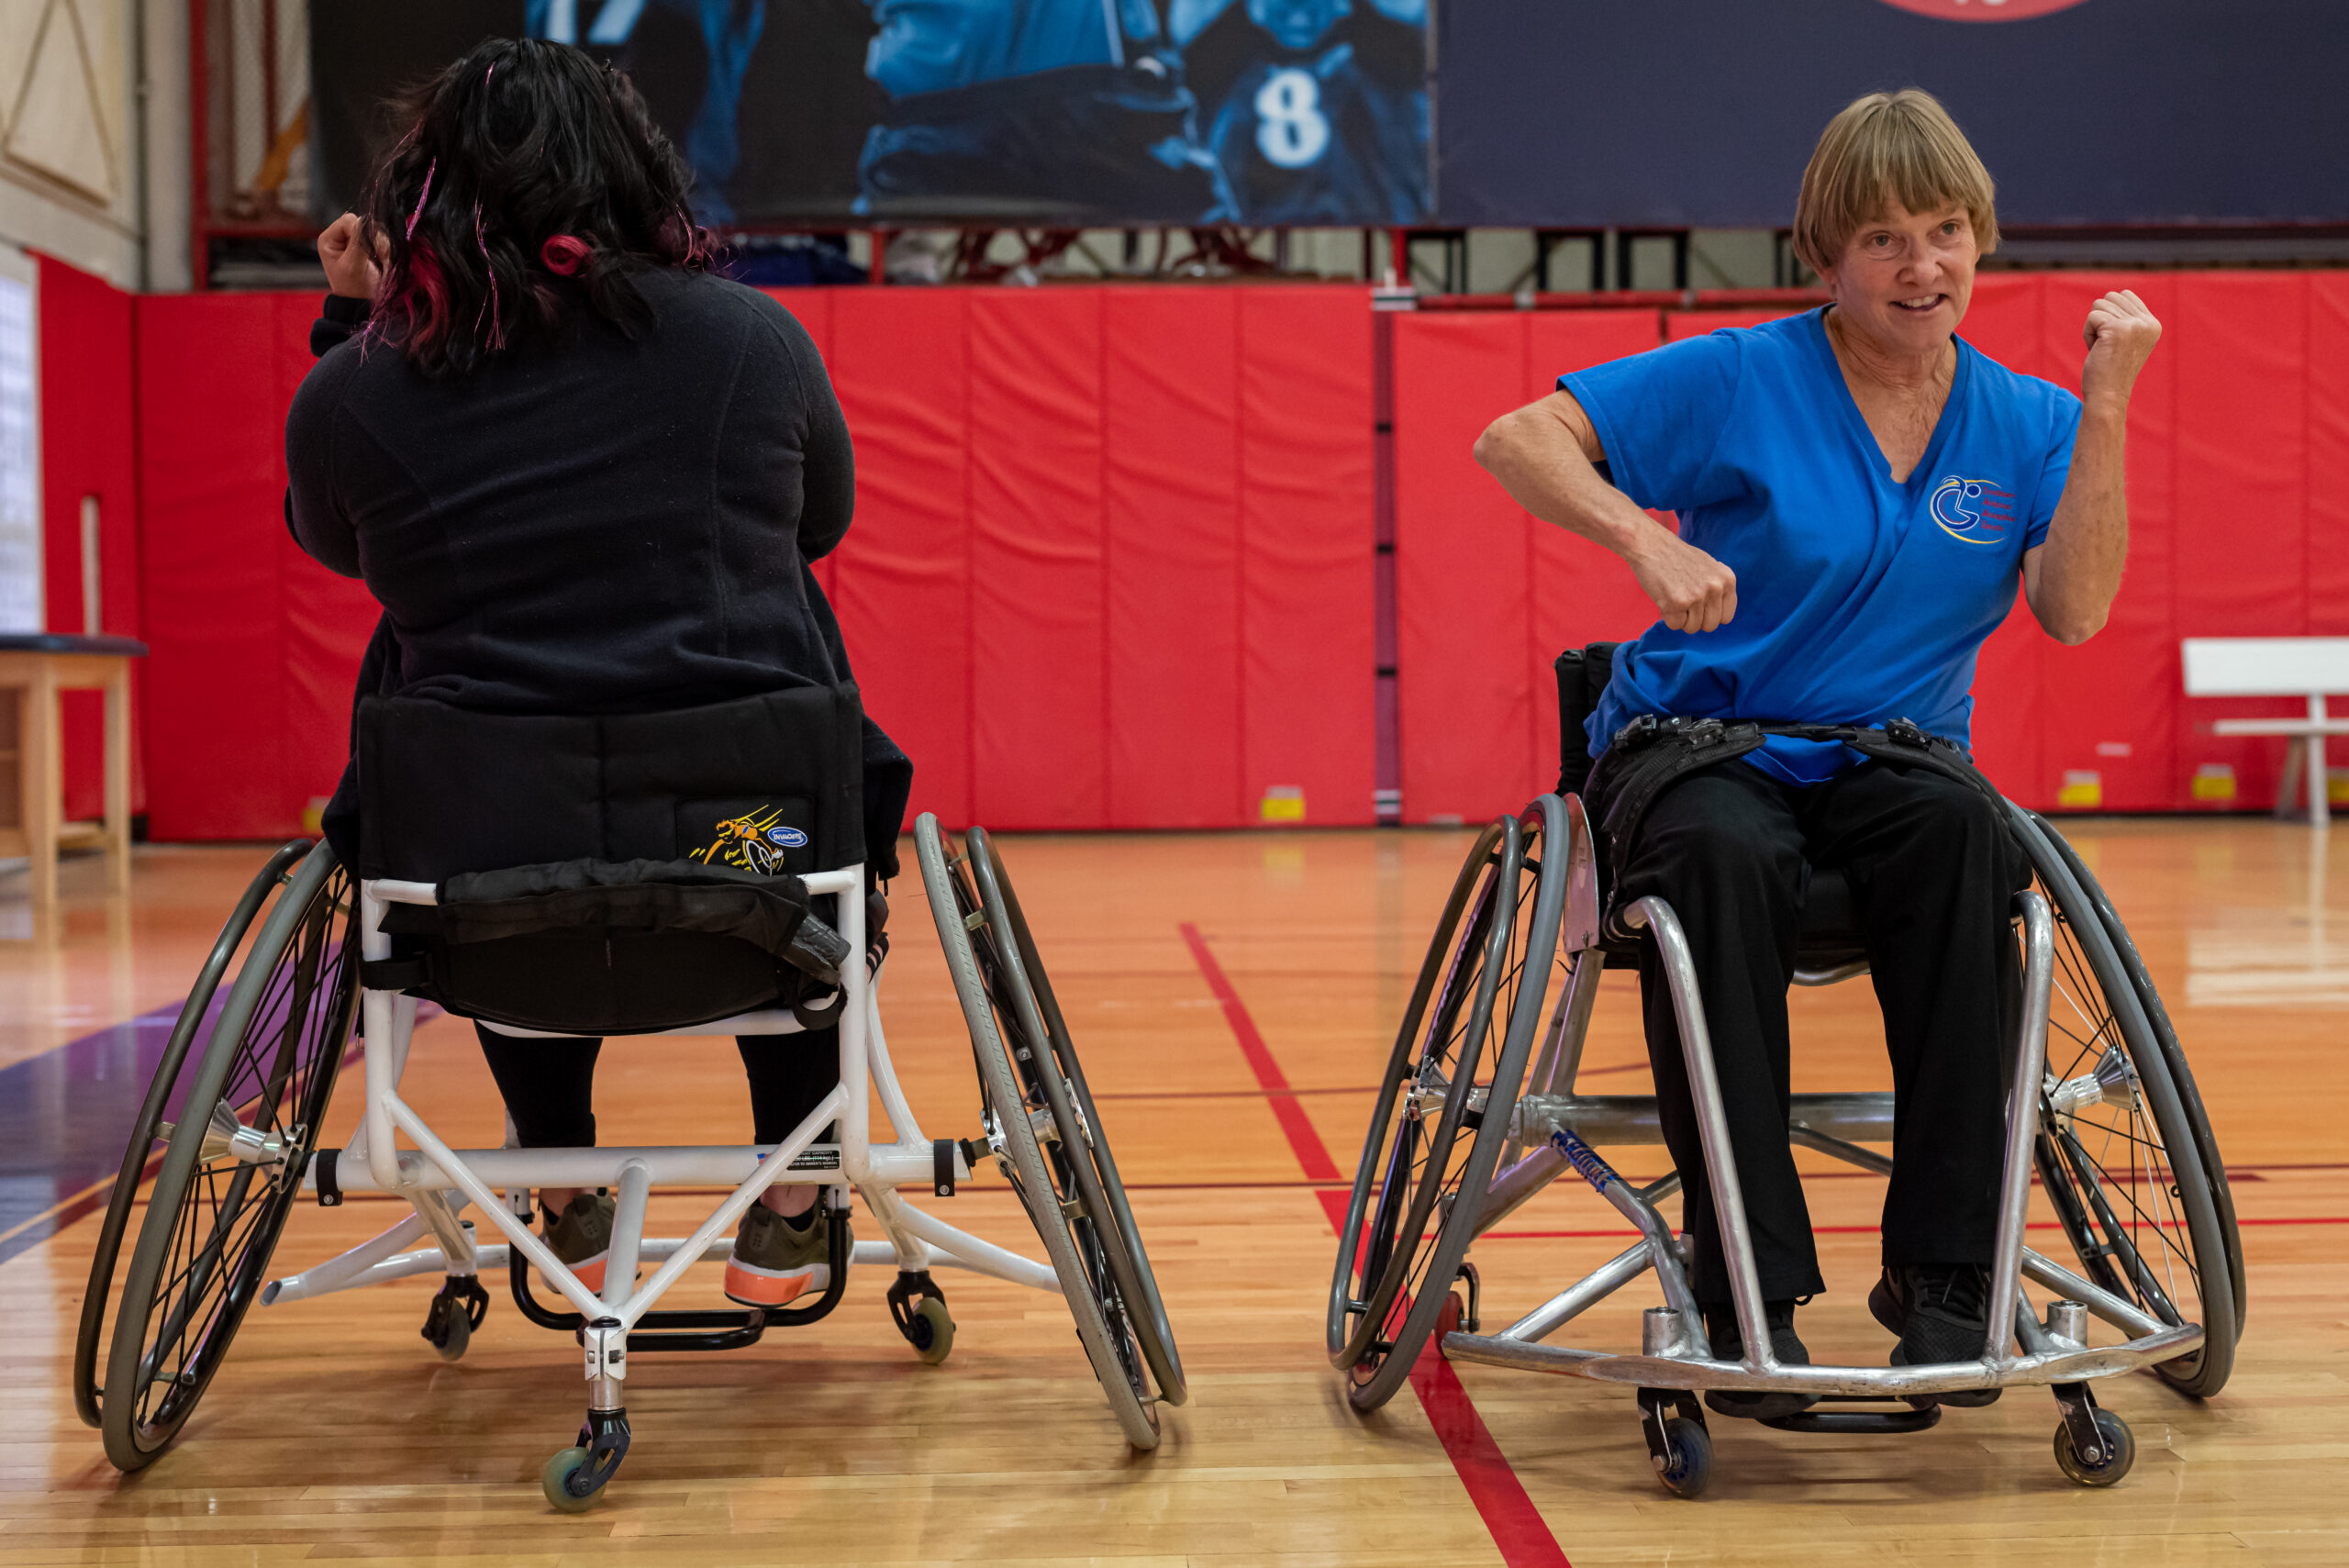 Two people in wheelchairs smiling and pounding their fists together